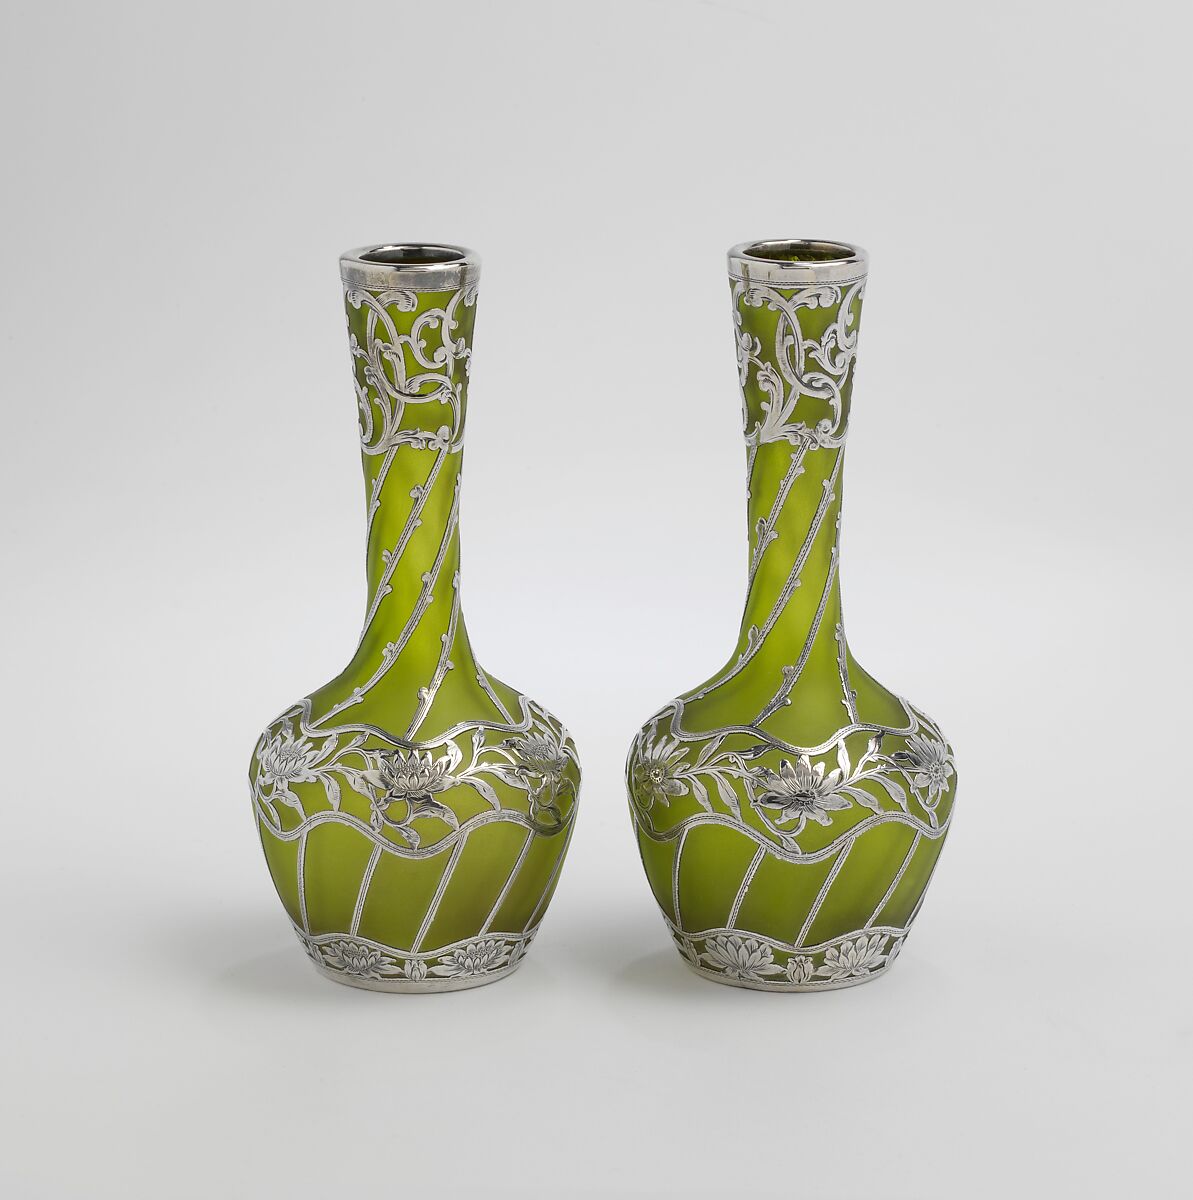 Pair of vases, Glass, silver, French, Paris 